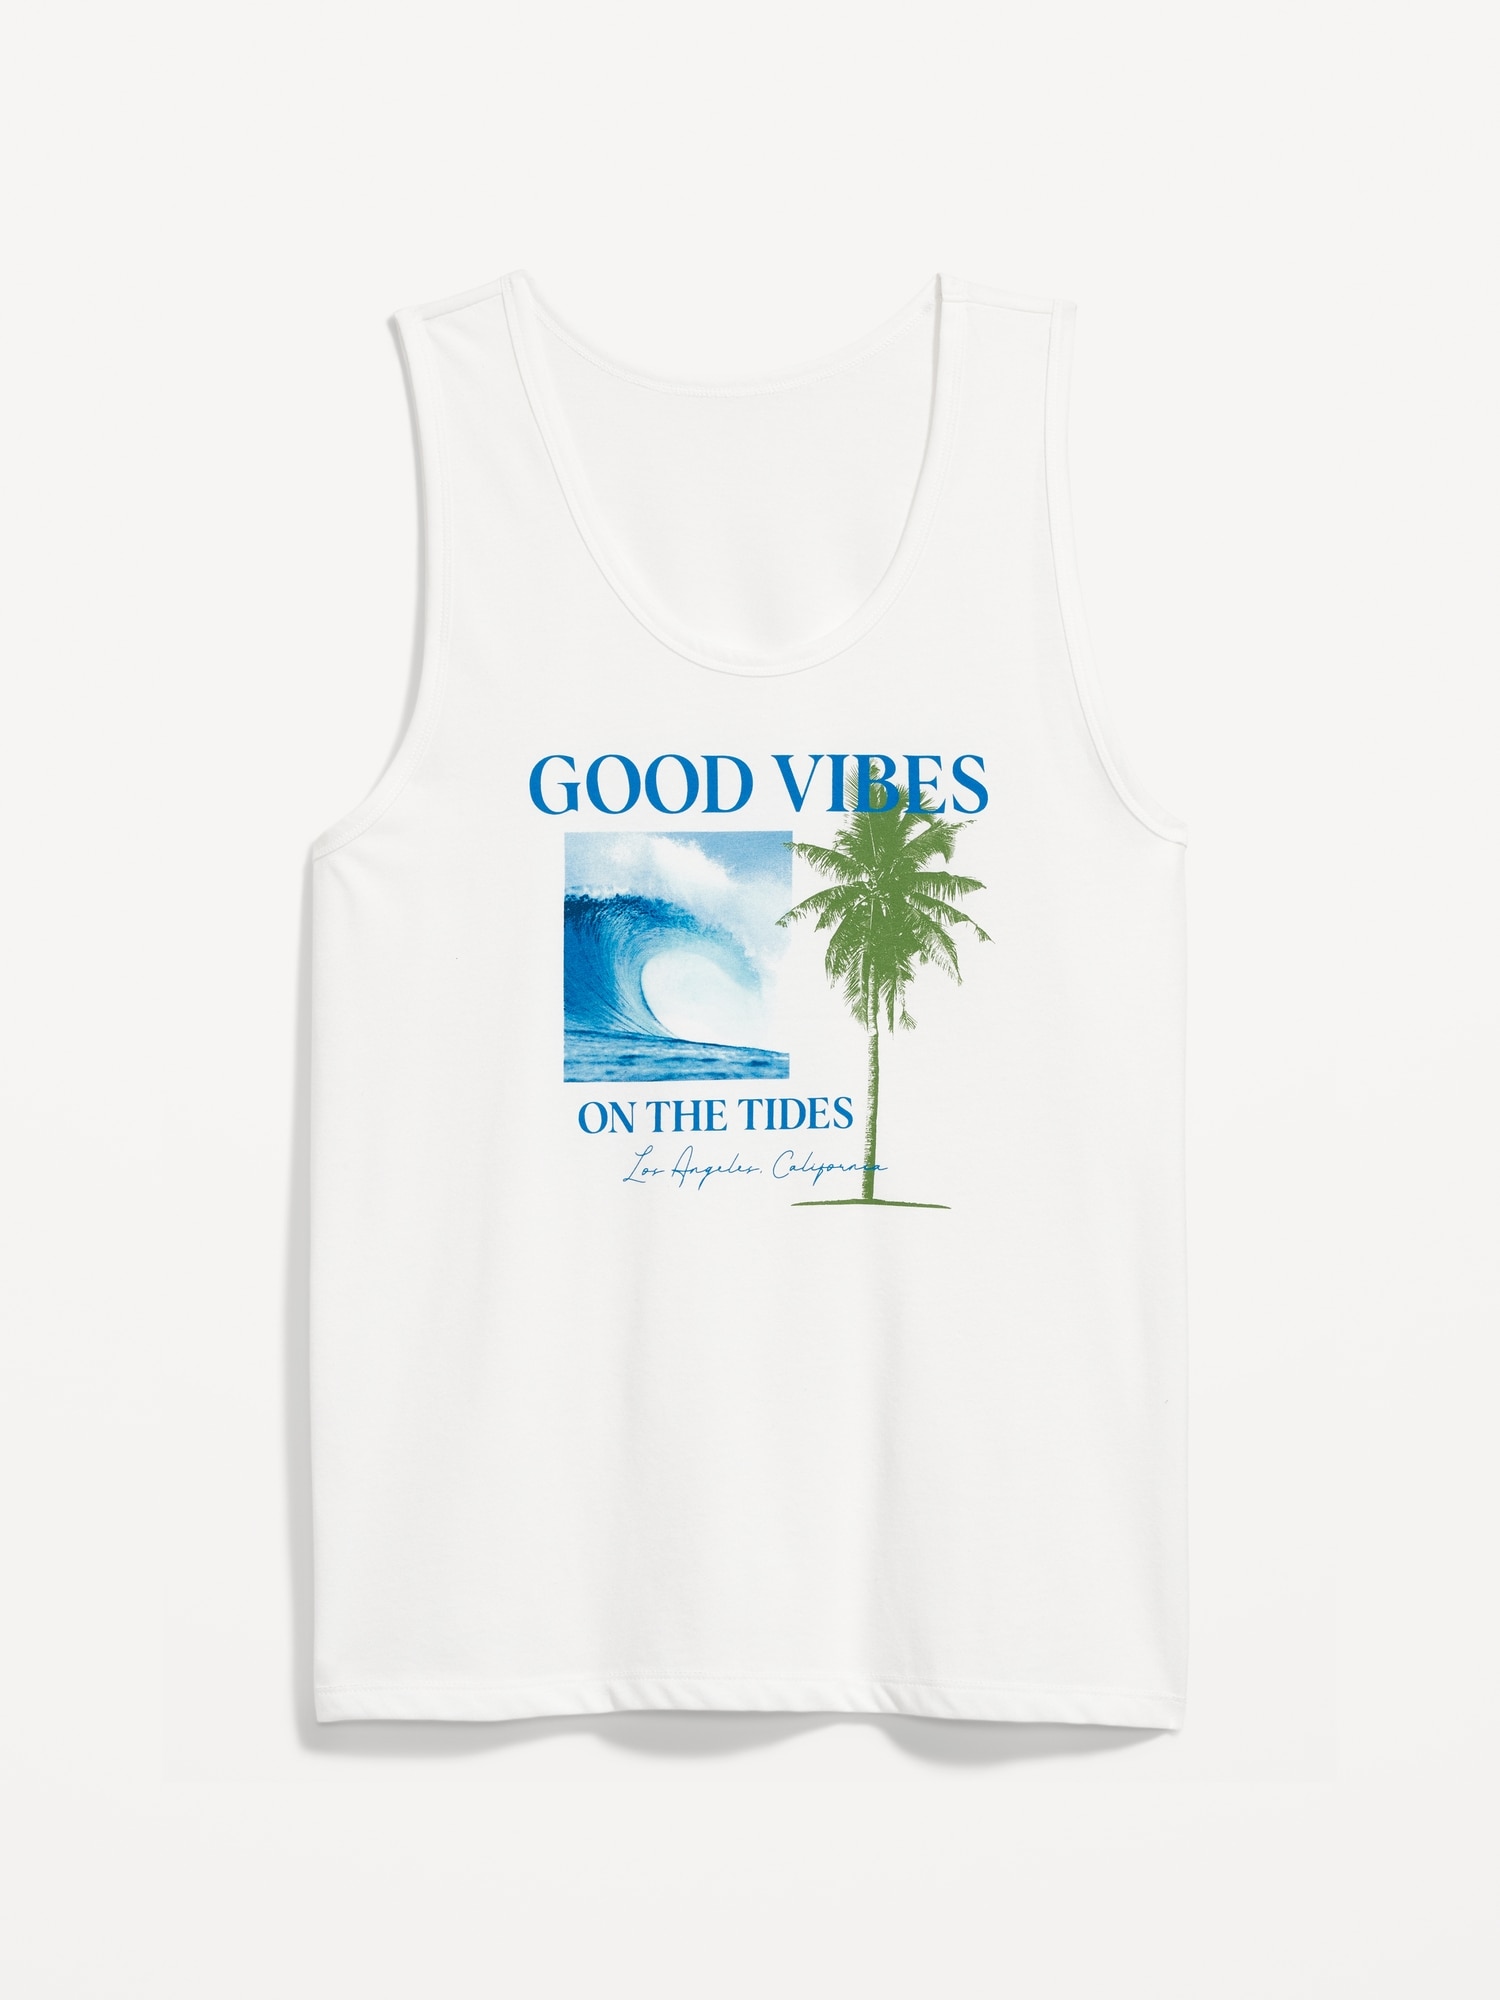 Soft-Washed Graphic Tank Top Hot Deal